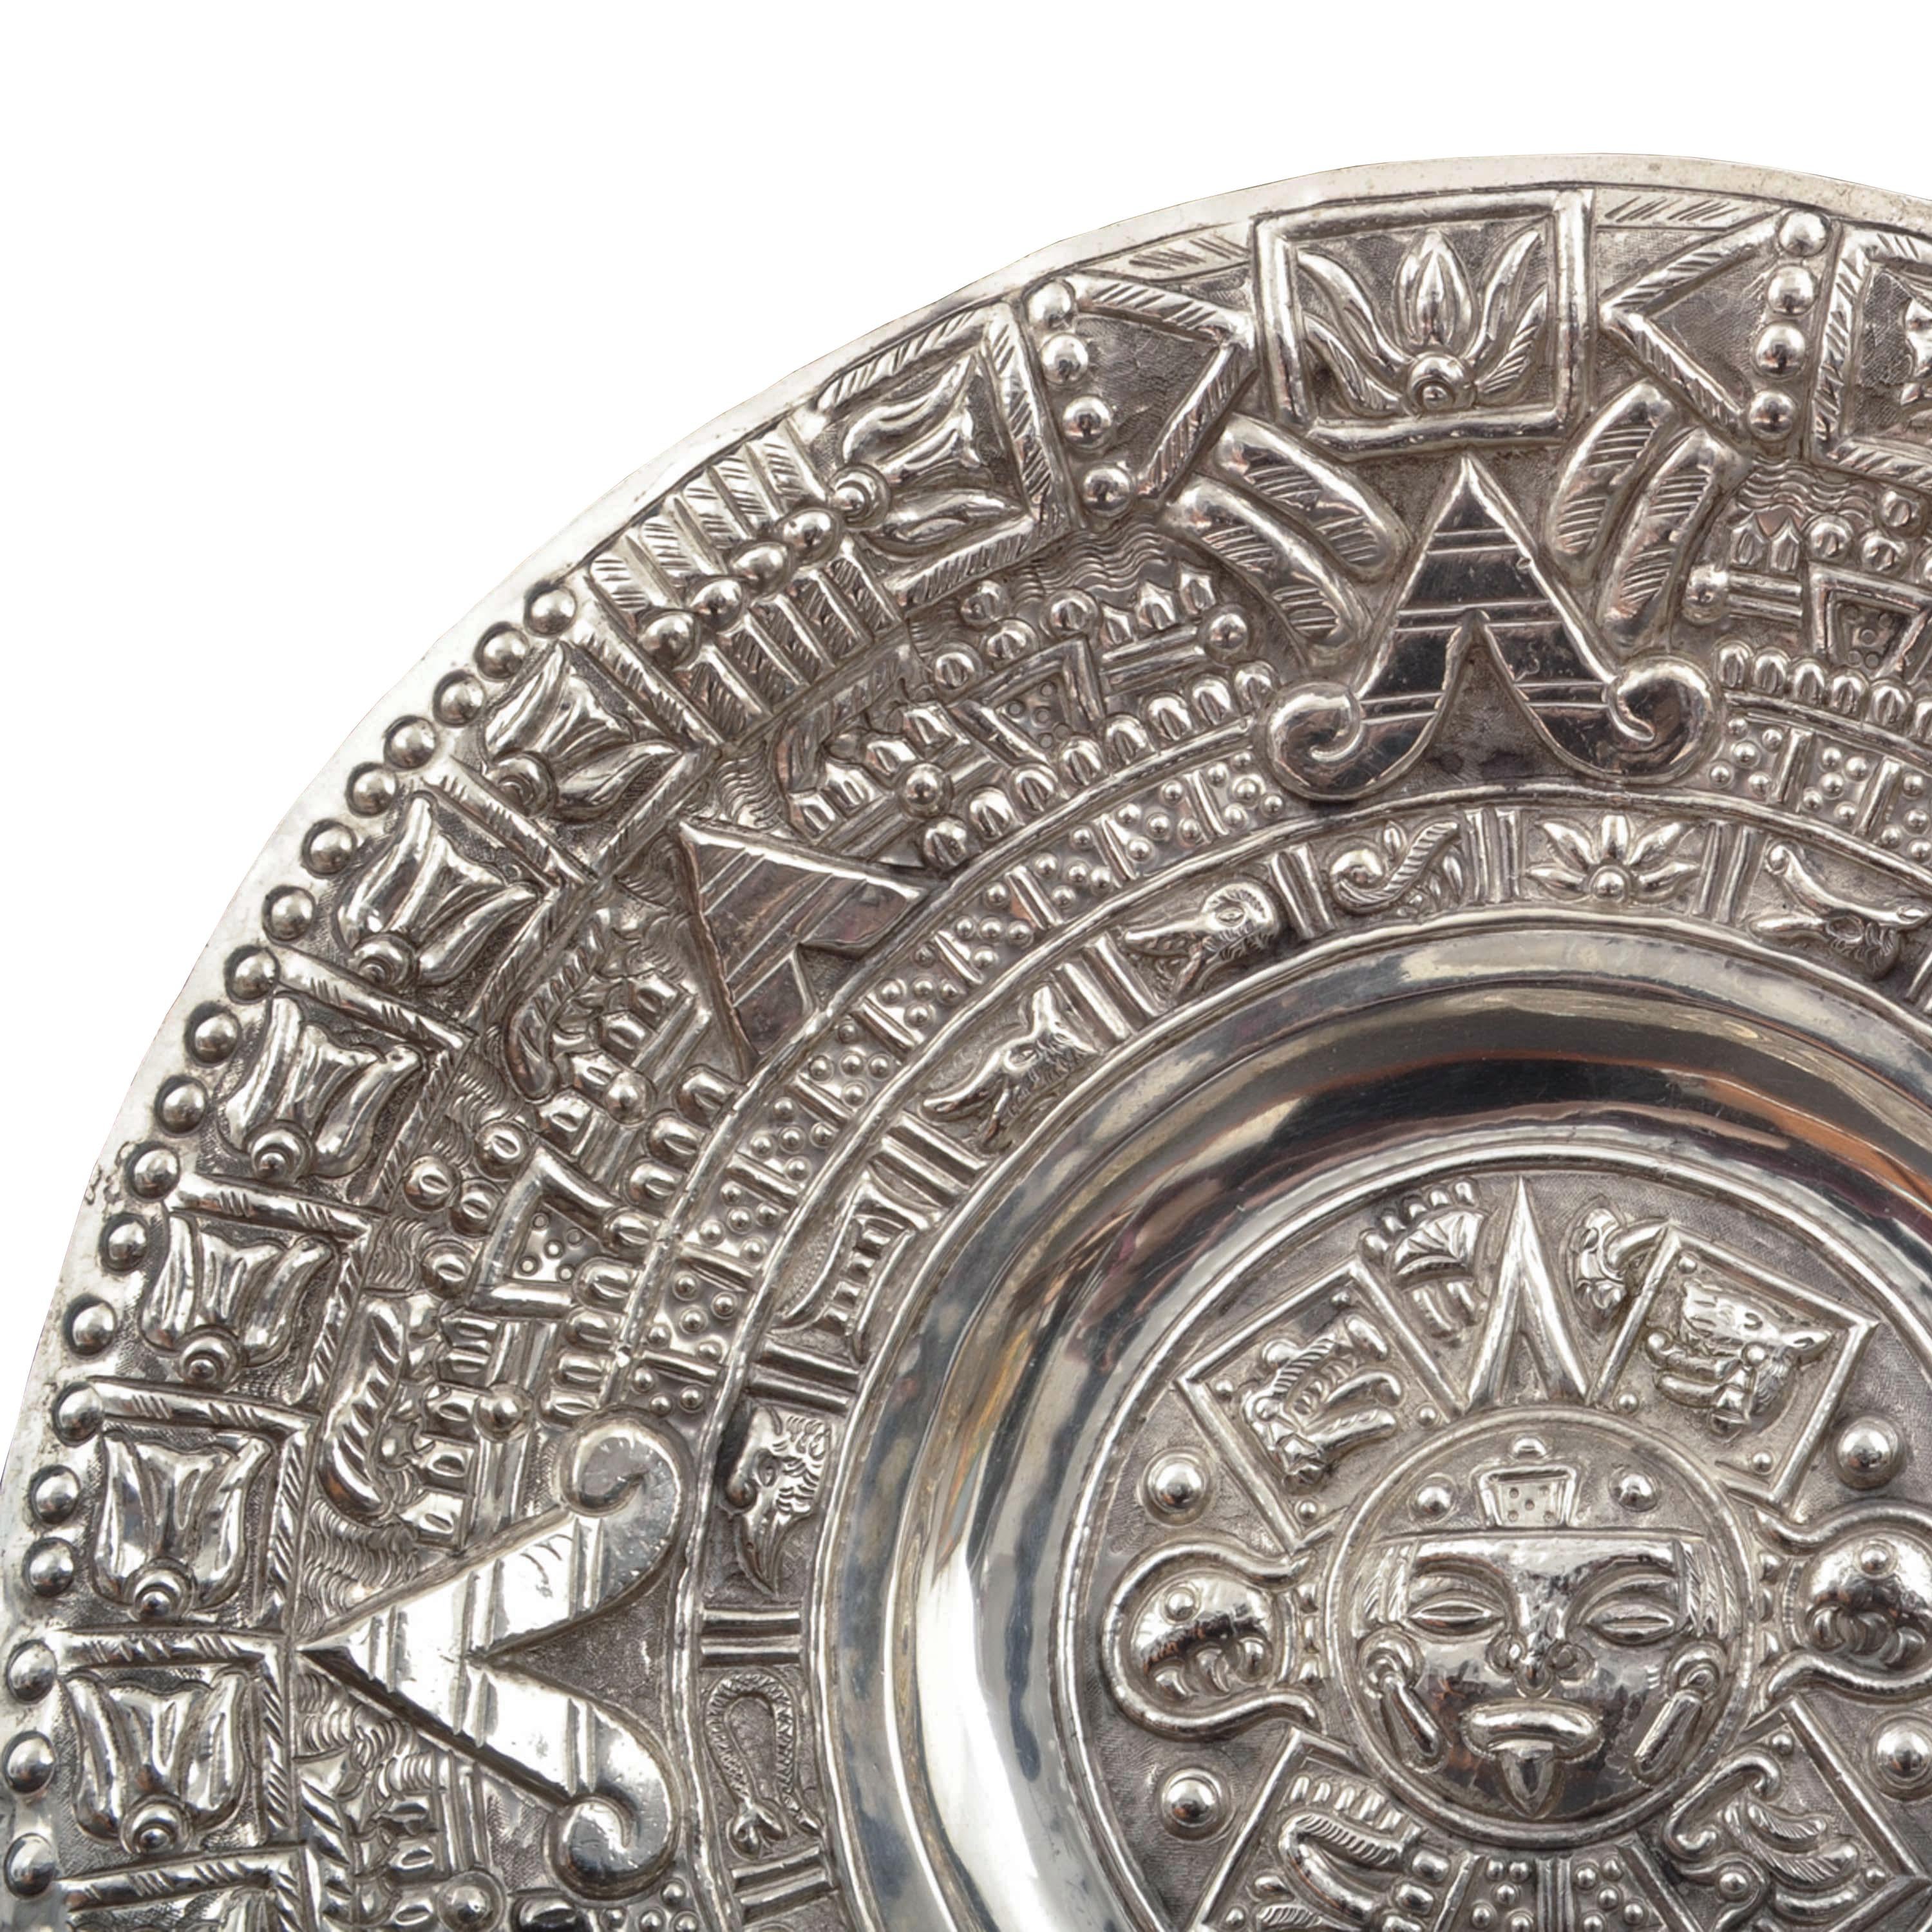 A good, large, Mid-Century Modern Mexican Sterling silver (probably Taxco) Aztec calendar wall charger, 1960's.
The charger of large size and weighing over 14oz (397 grams) of sterling silver, depicting the Aztec calendar with an Aztec sun mask to